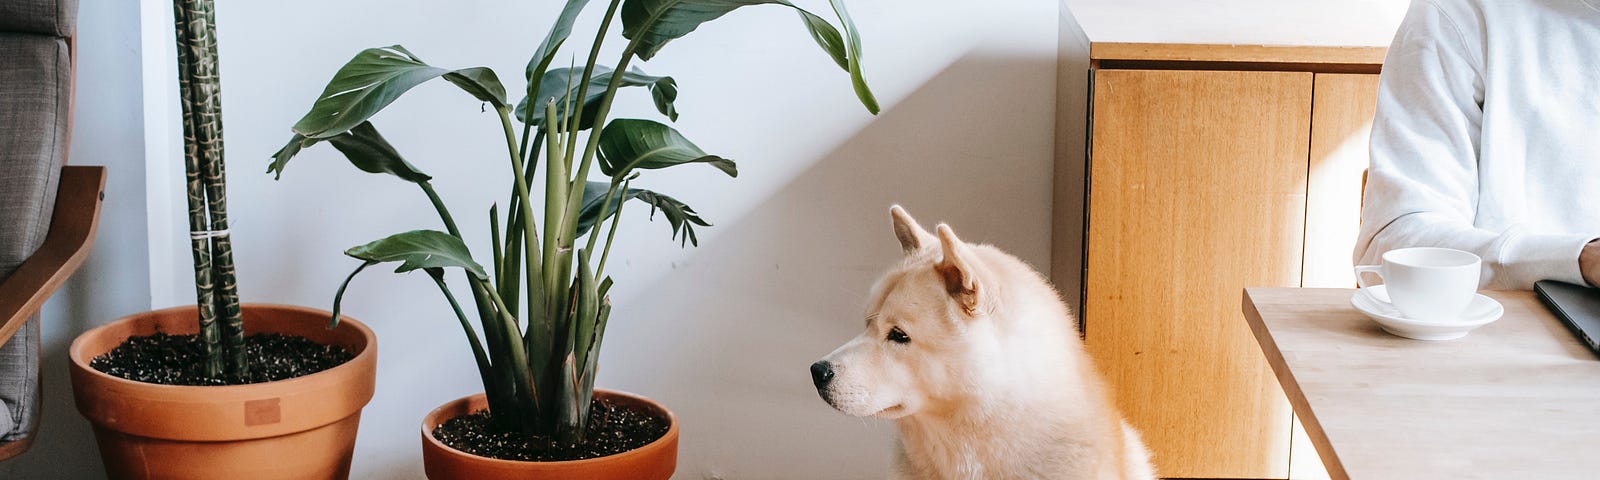 Dog next to a house plant